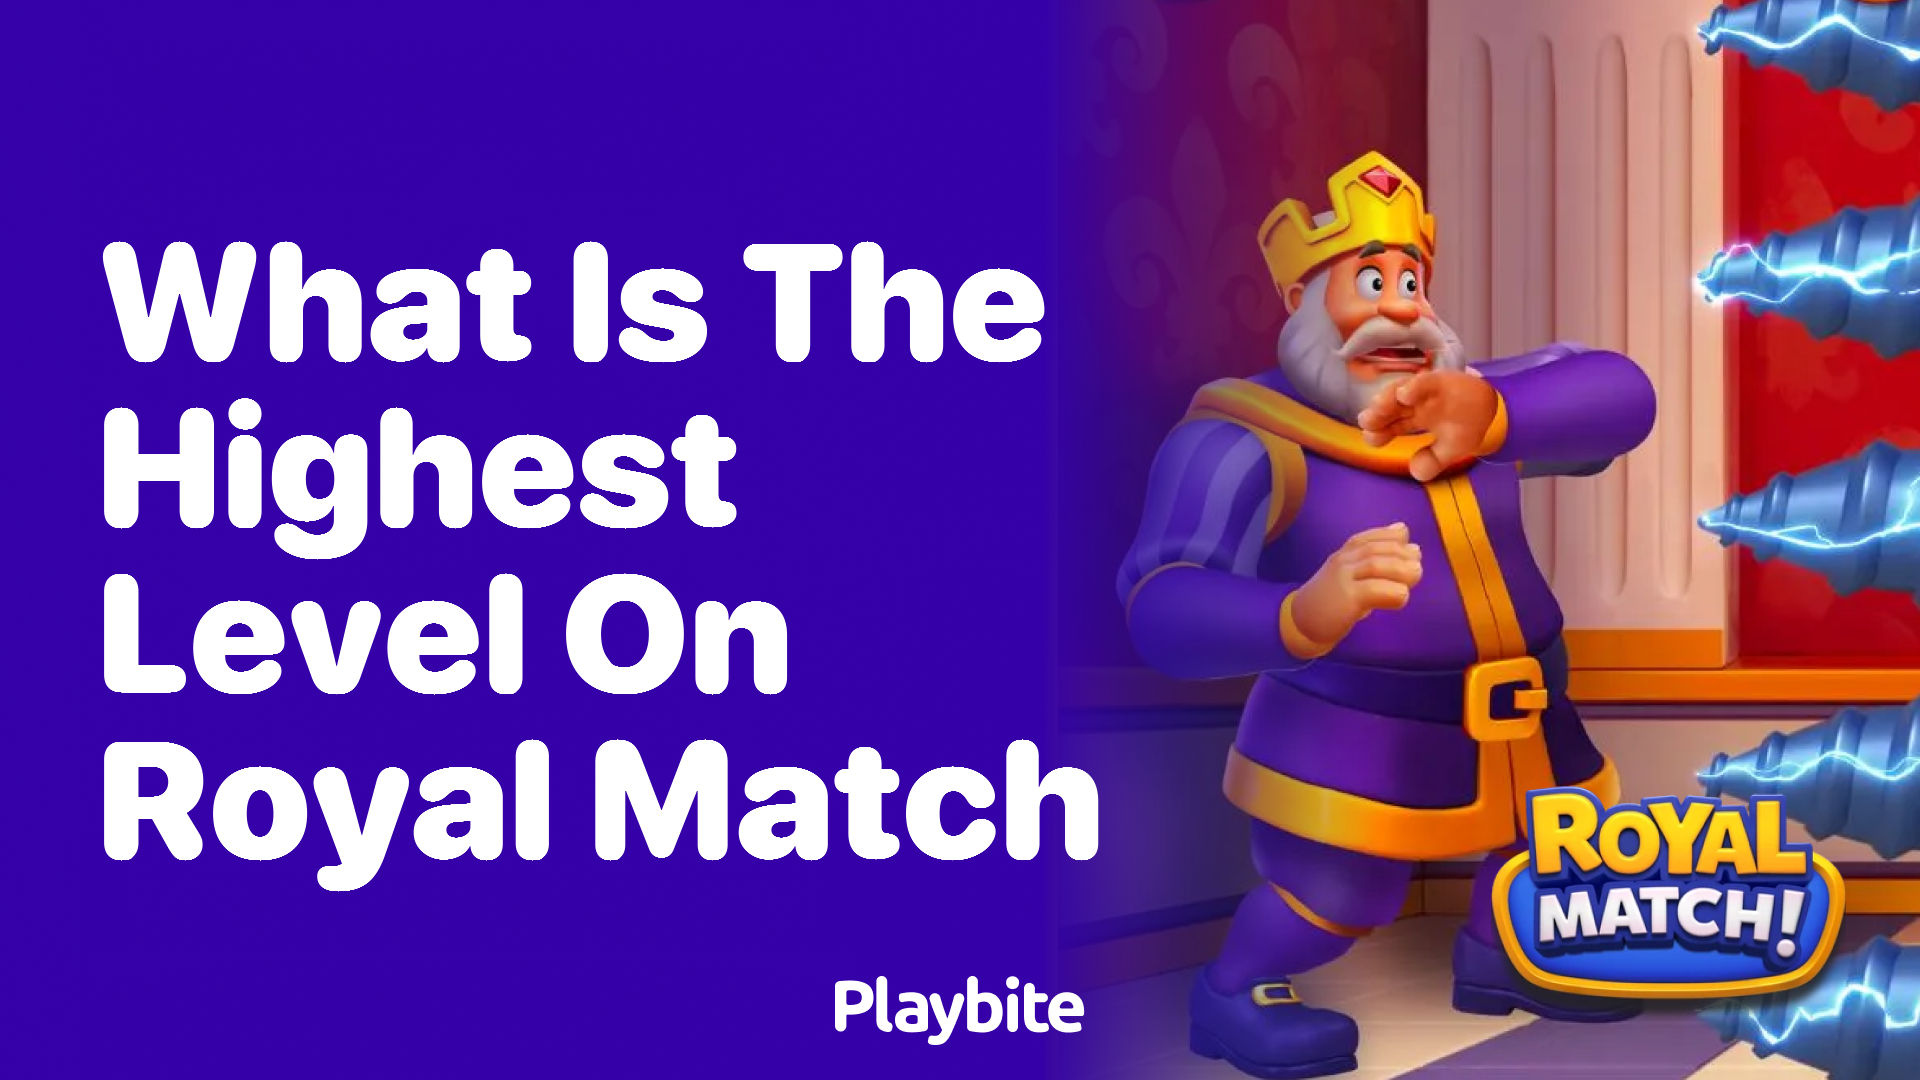 What is the Highest Level on Royal Match?